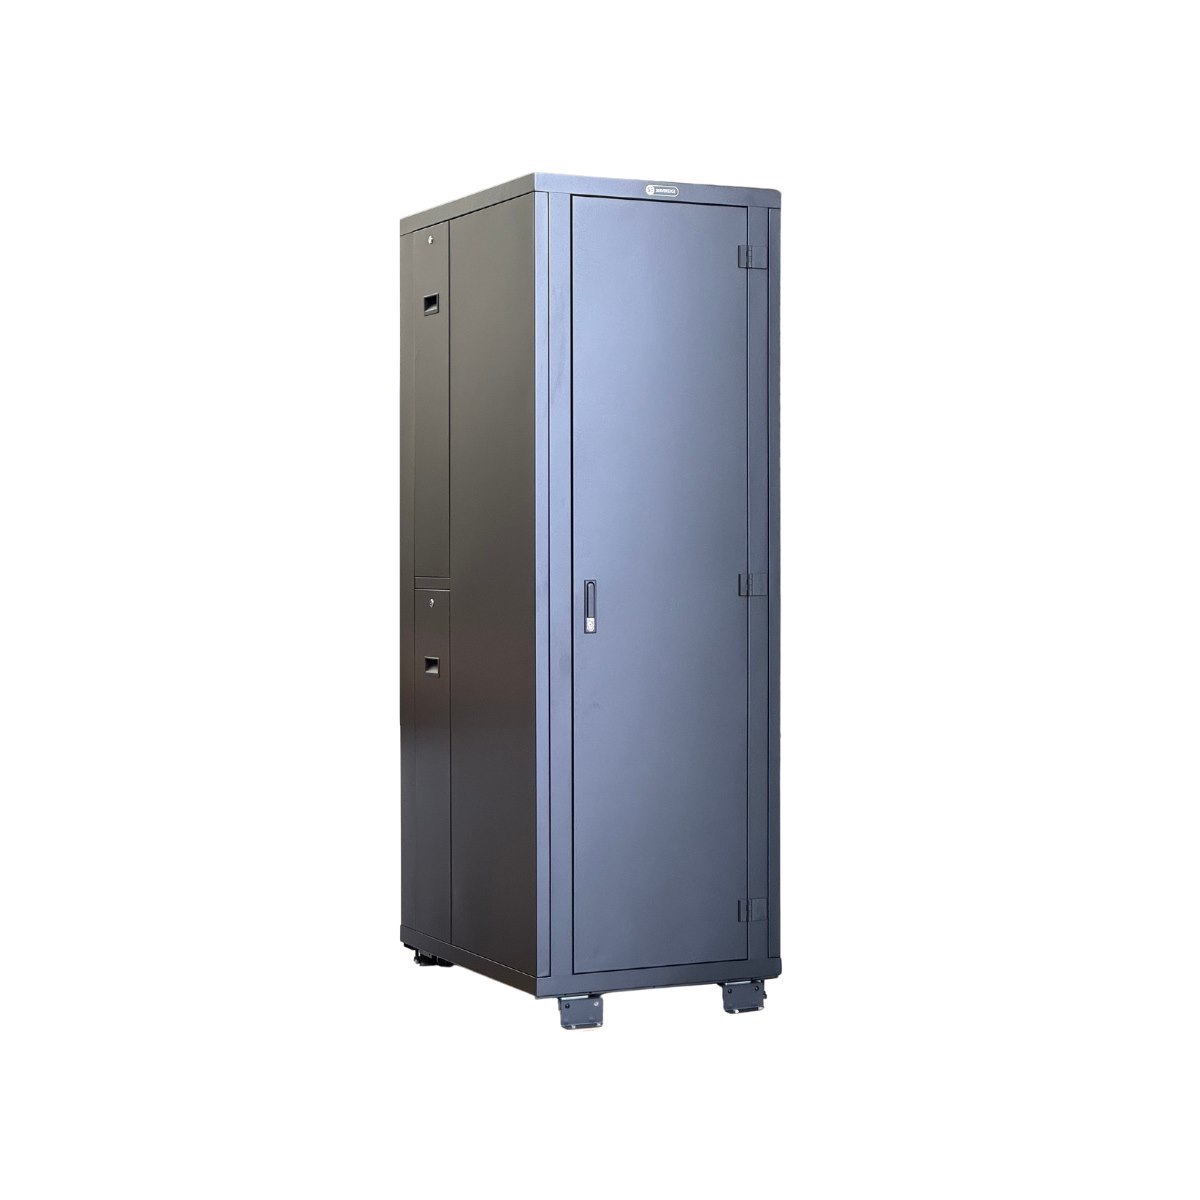 Serveredge 45Ru 750W X 1050D *Acoustic* Fully Assembled Premium Free Standing CabinetIncludes:* Front Metal Door .* 1CM Sound Emitting Isolation Material Covers All Doors And Panels With Double Skins